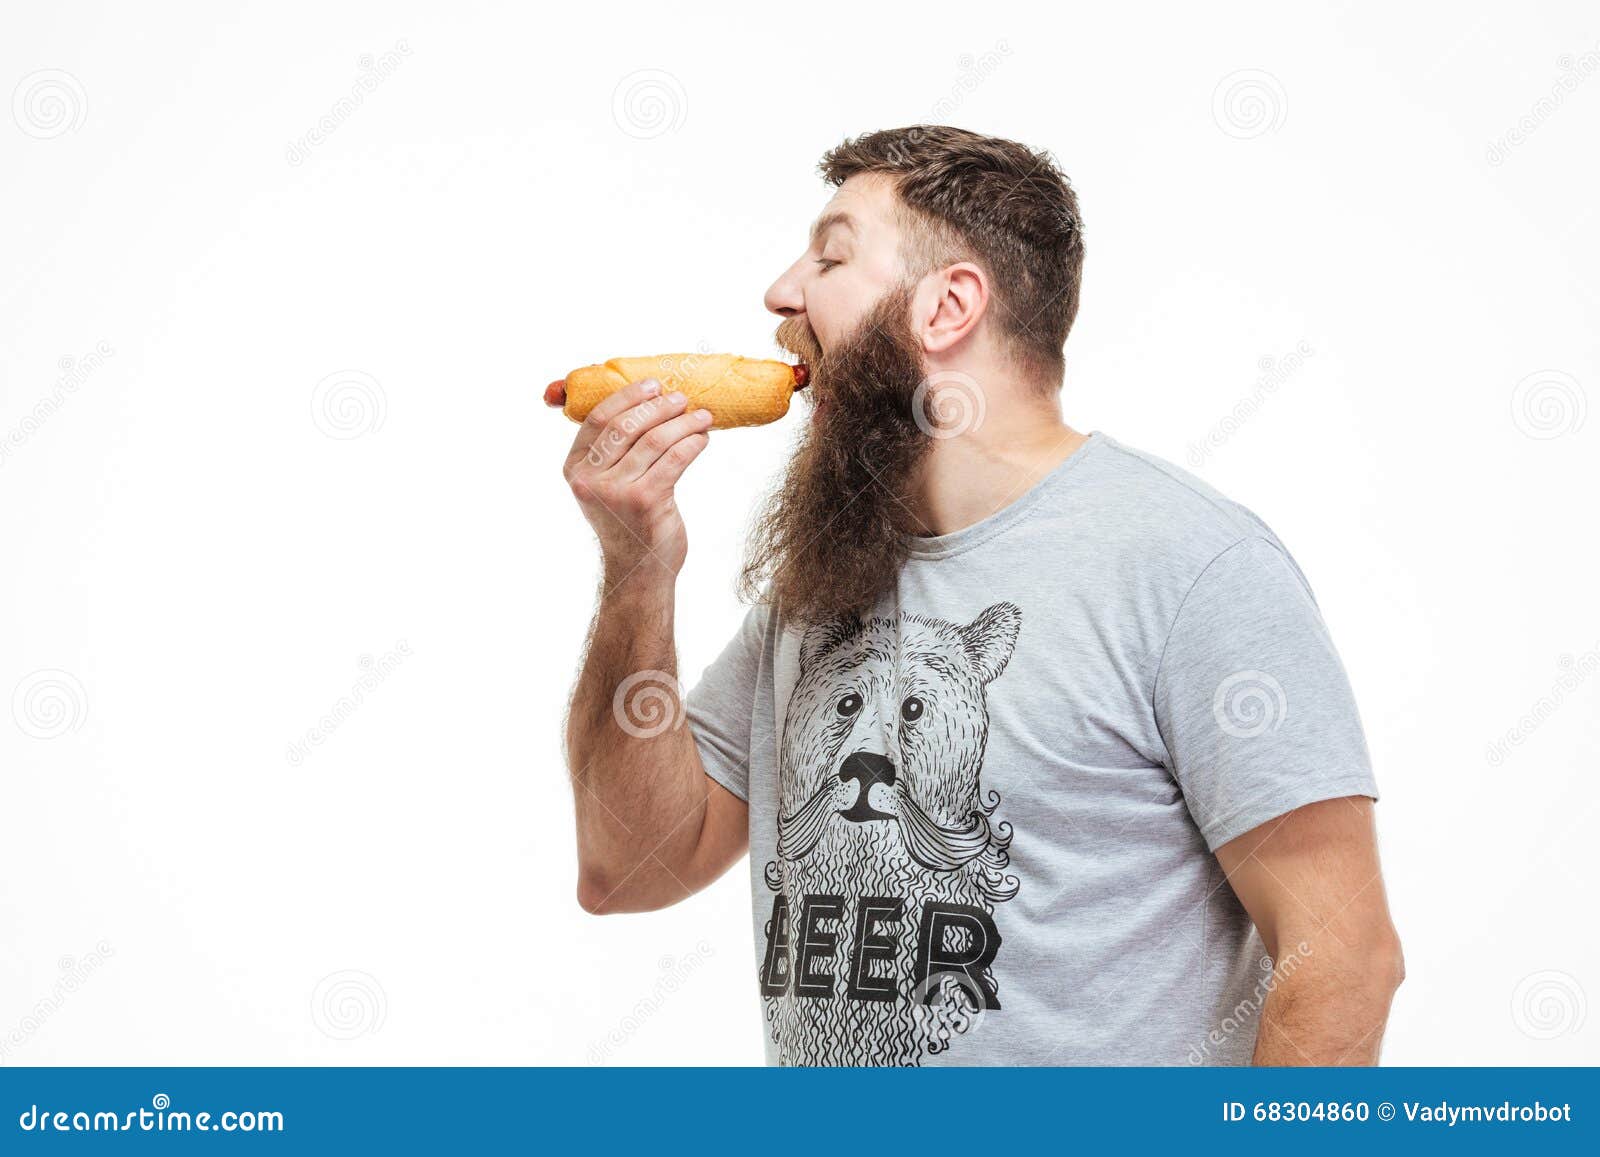 handsome man with beard standing and eating hot dog